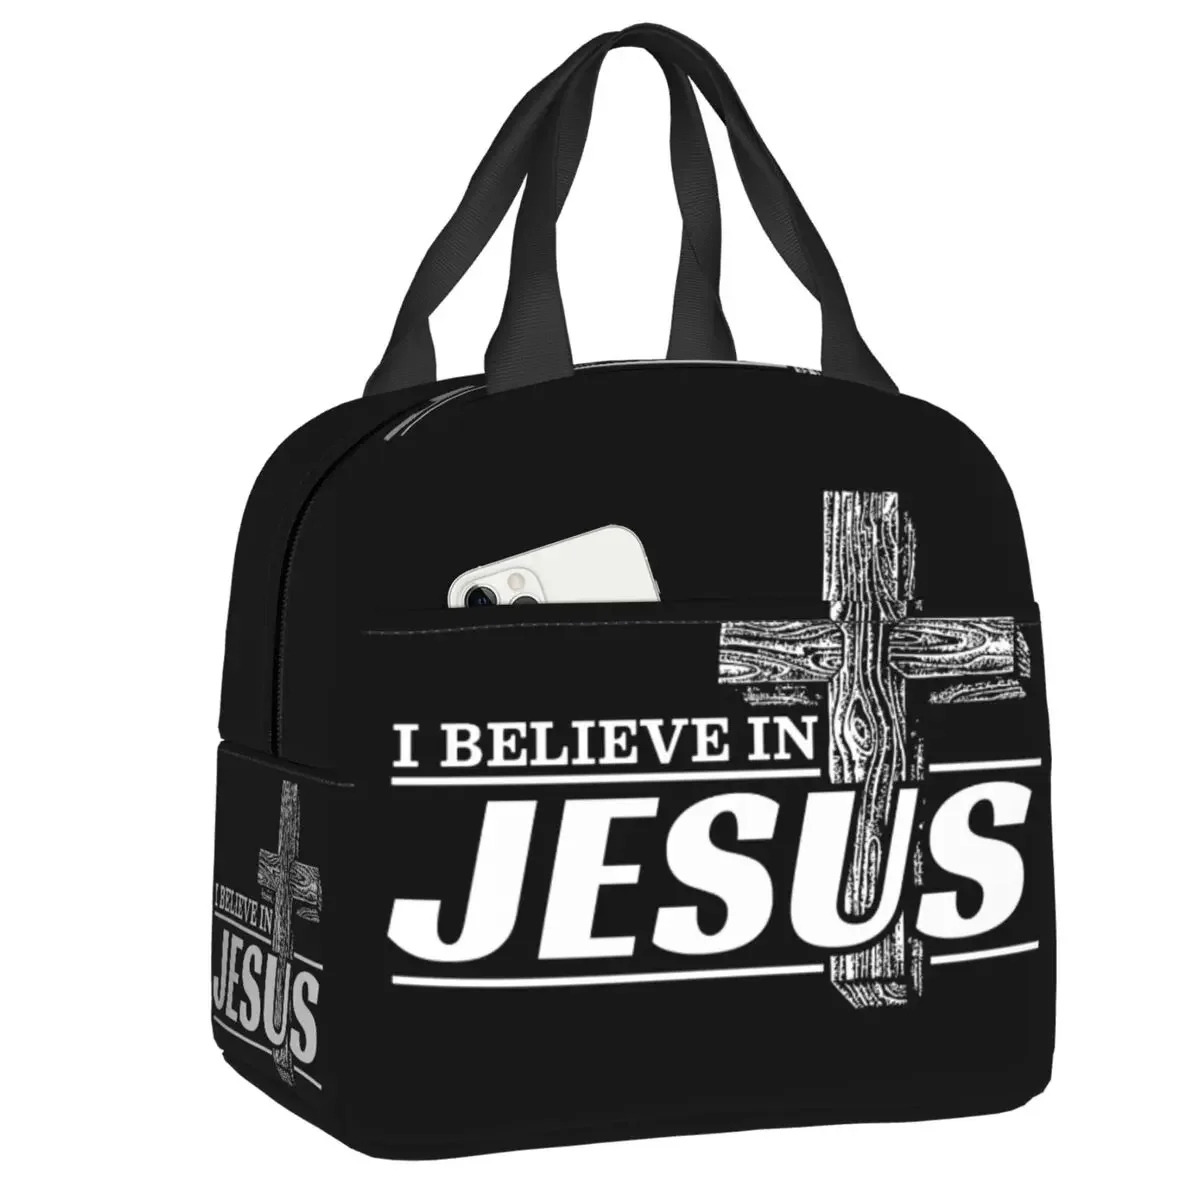 

I Believe In Jesus Christ Lunch Bag Women Thermal Cooler Warm Insulated Cristianity Faith Lunch Box for Kids School Food Bags